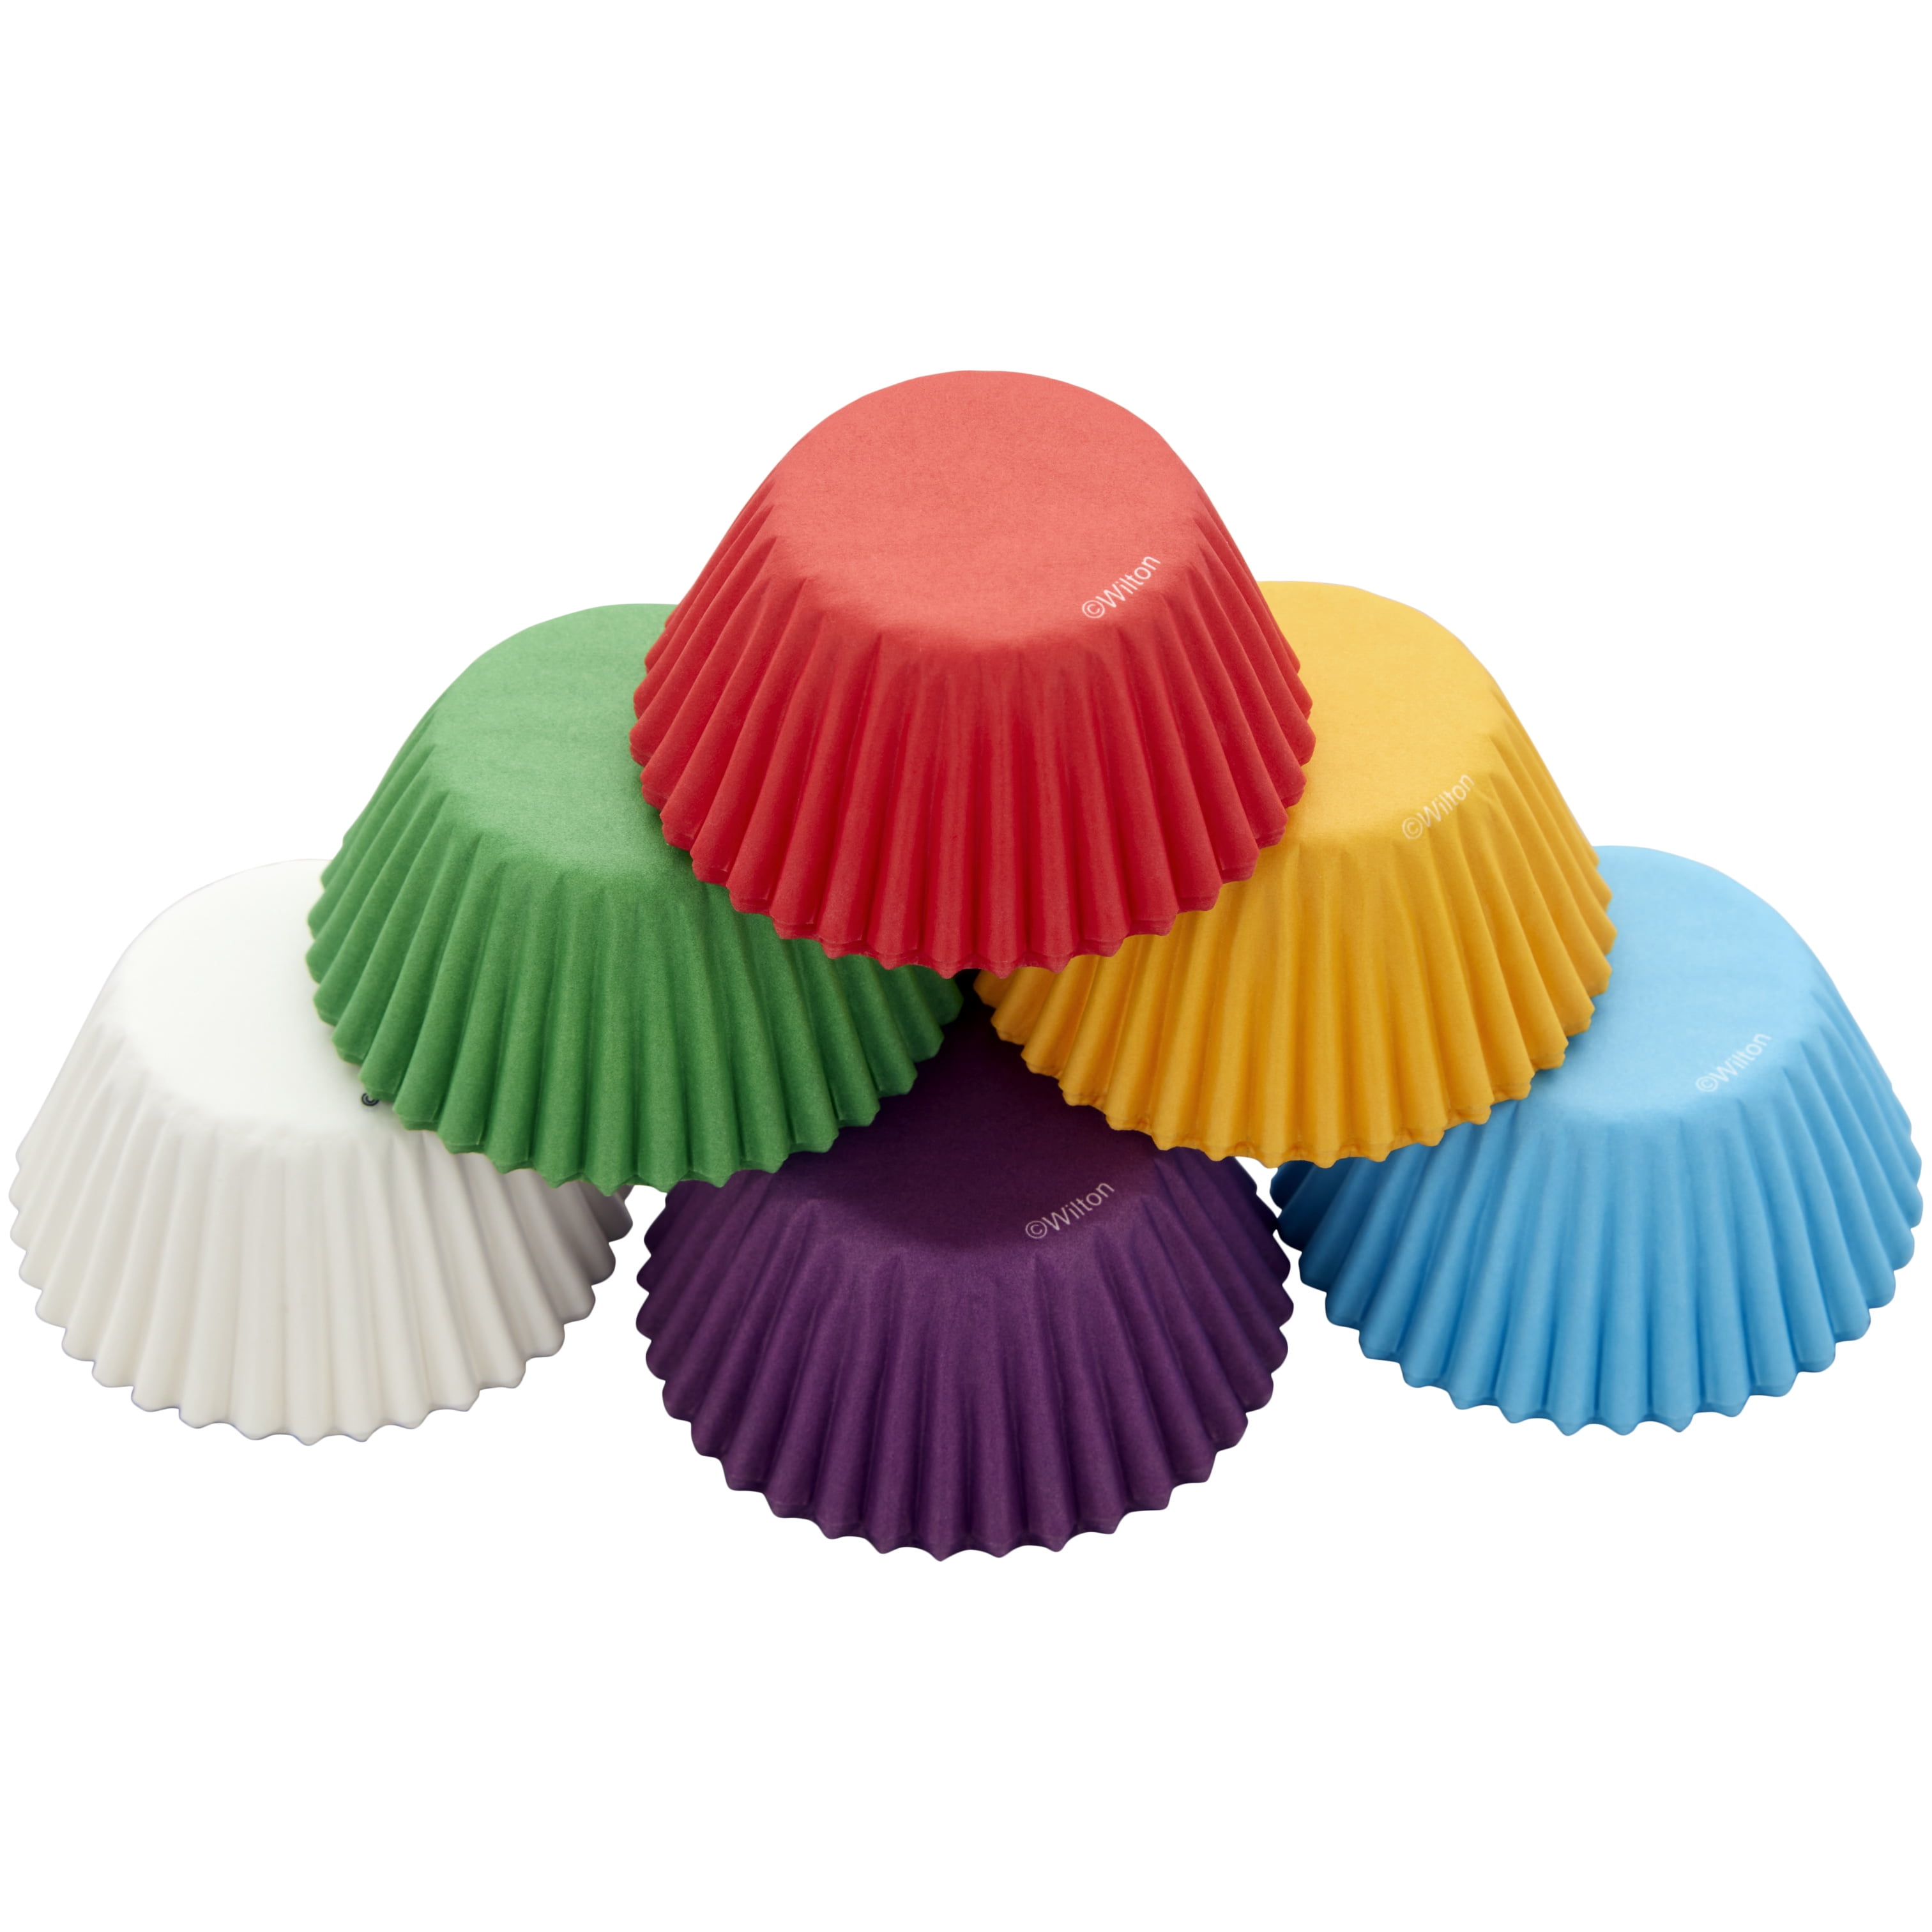 Wilton Rainbow Brights Cupcake Liners, 150-Count, Assorted